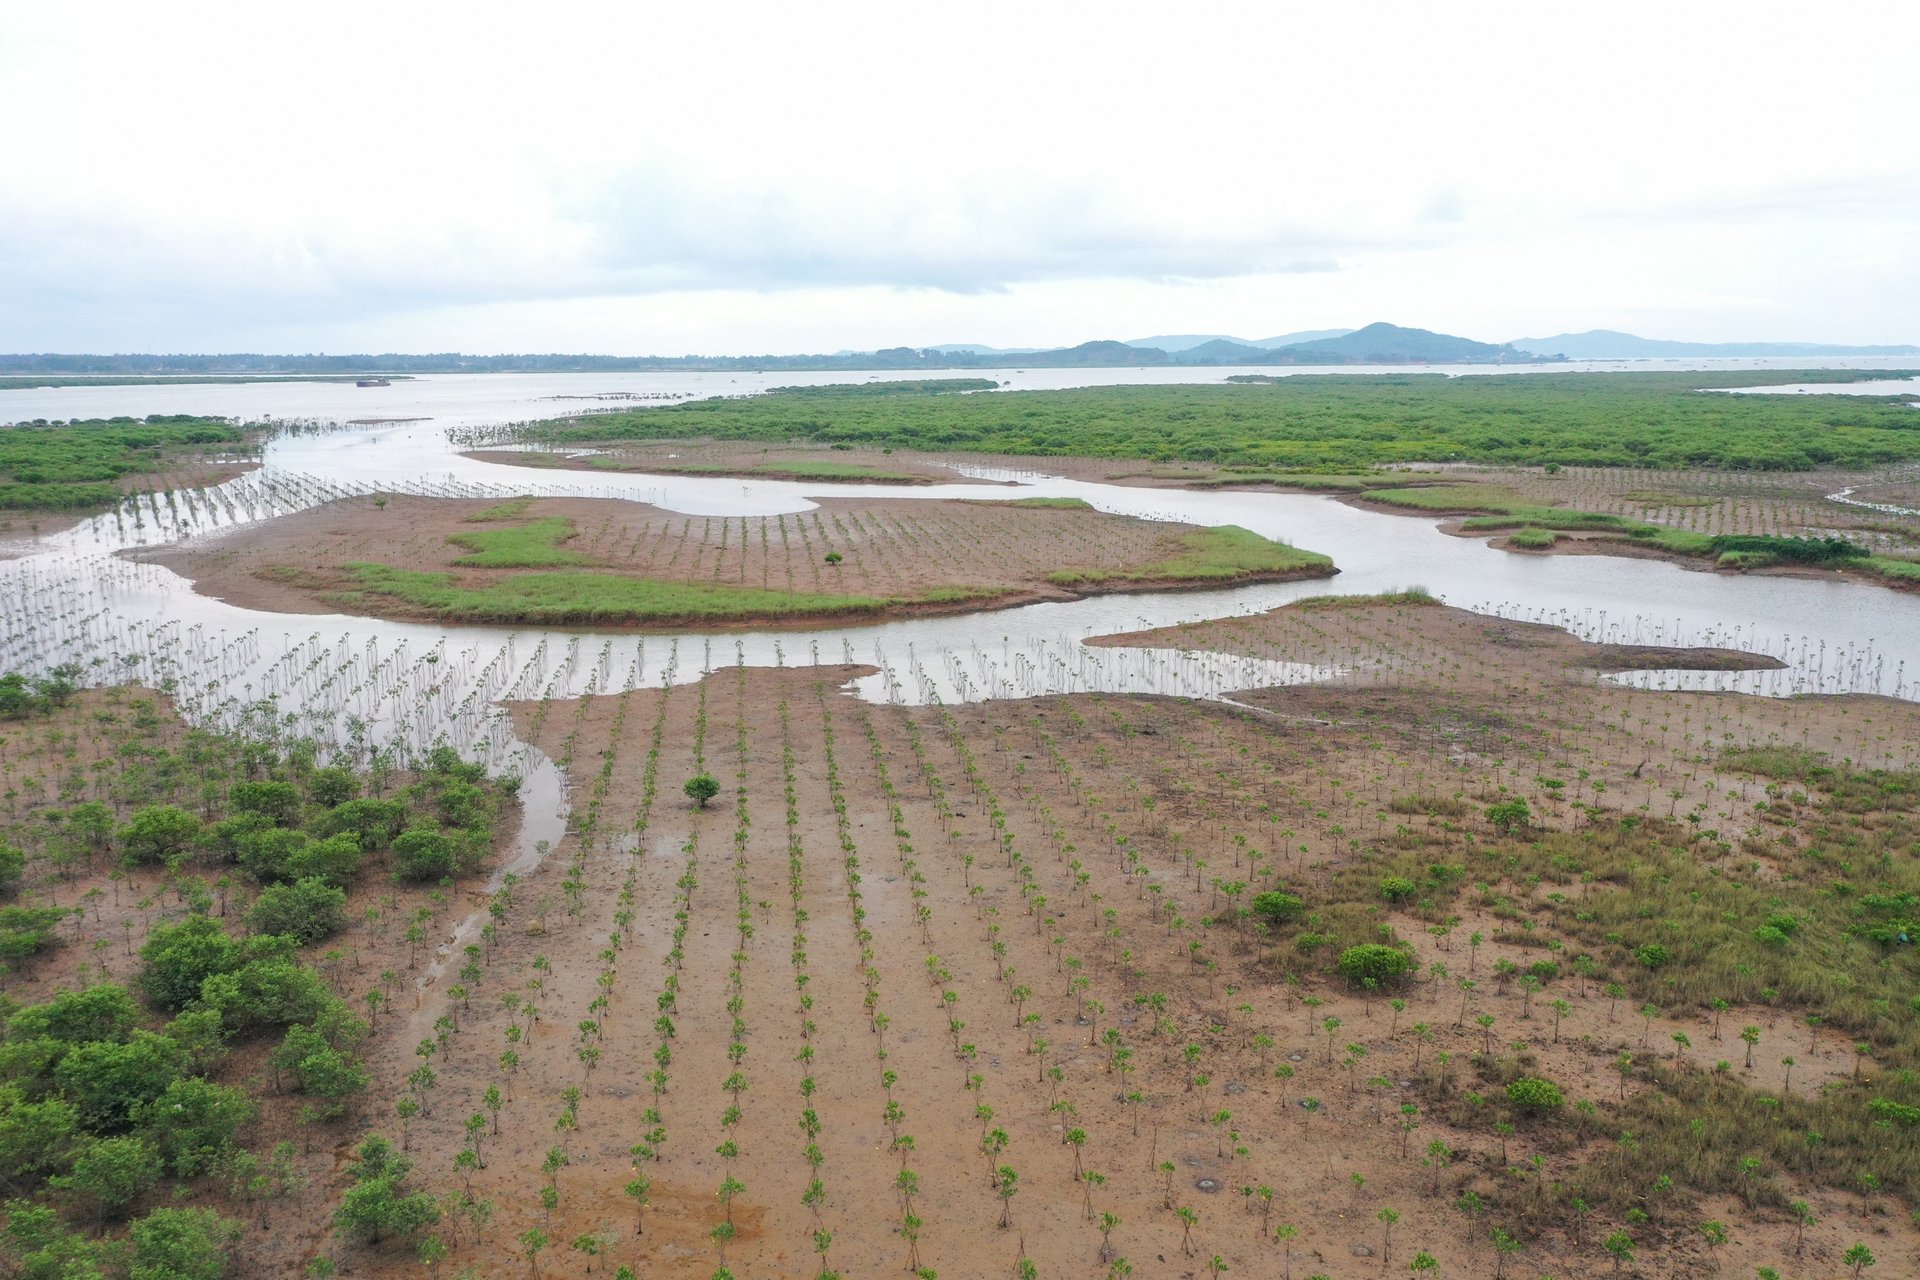 The recently planted mangrove forest area located in Mong Cai city, Quang Ninh province. Photo: Tung Dinh.